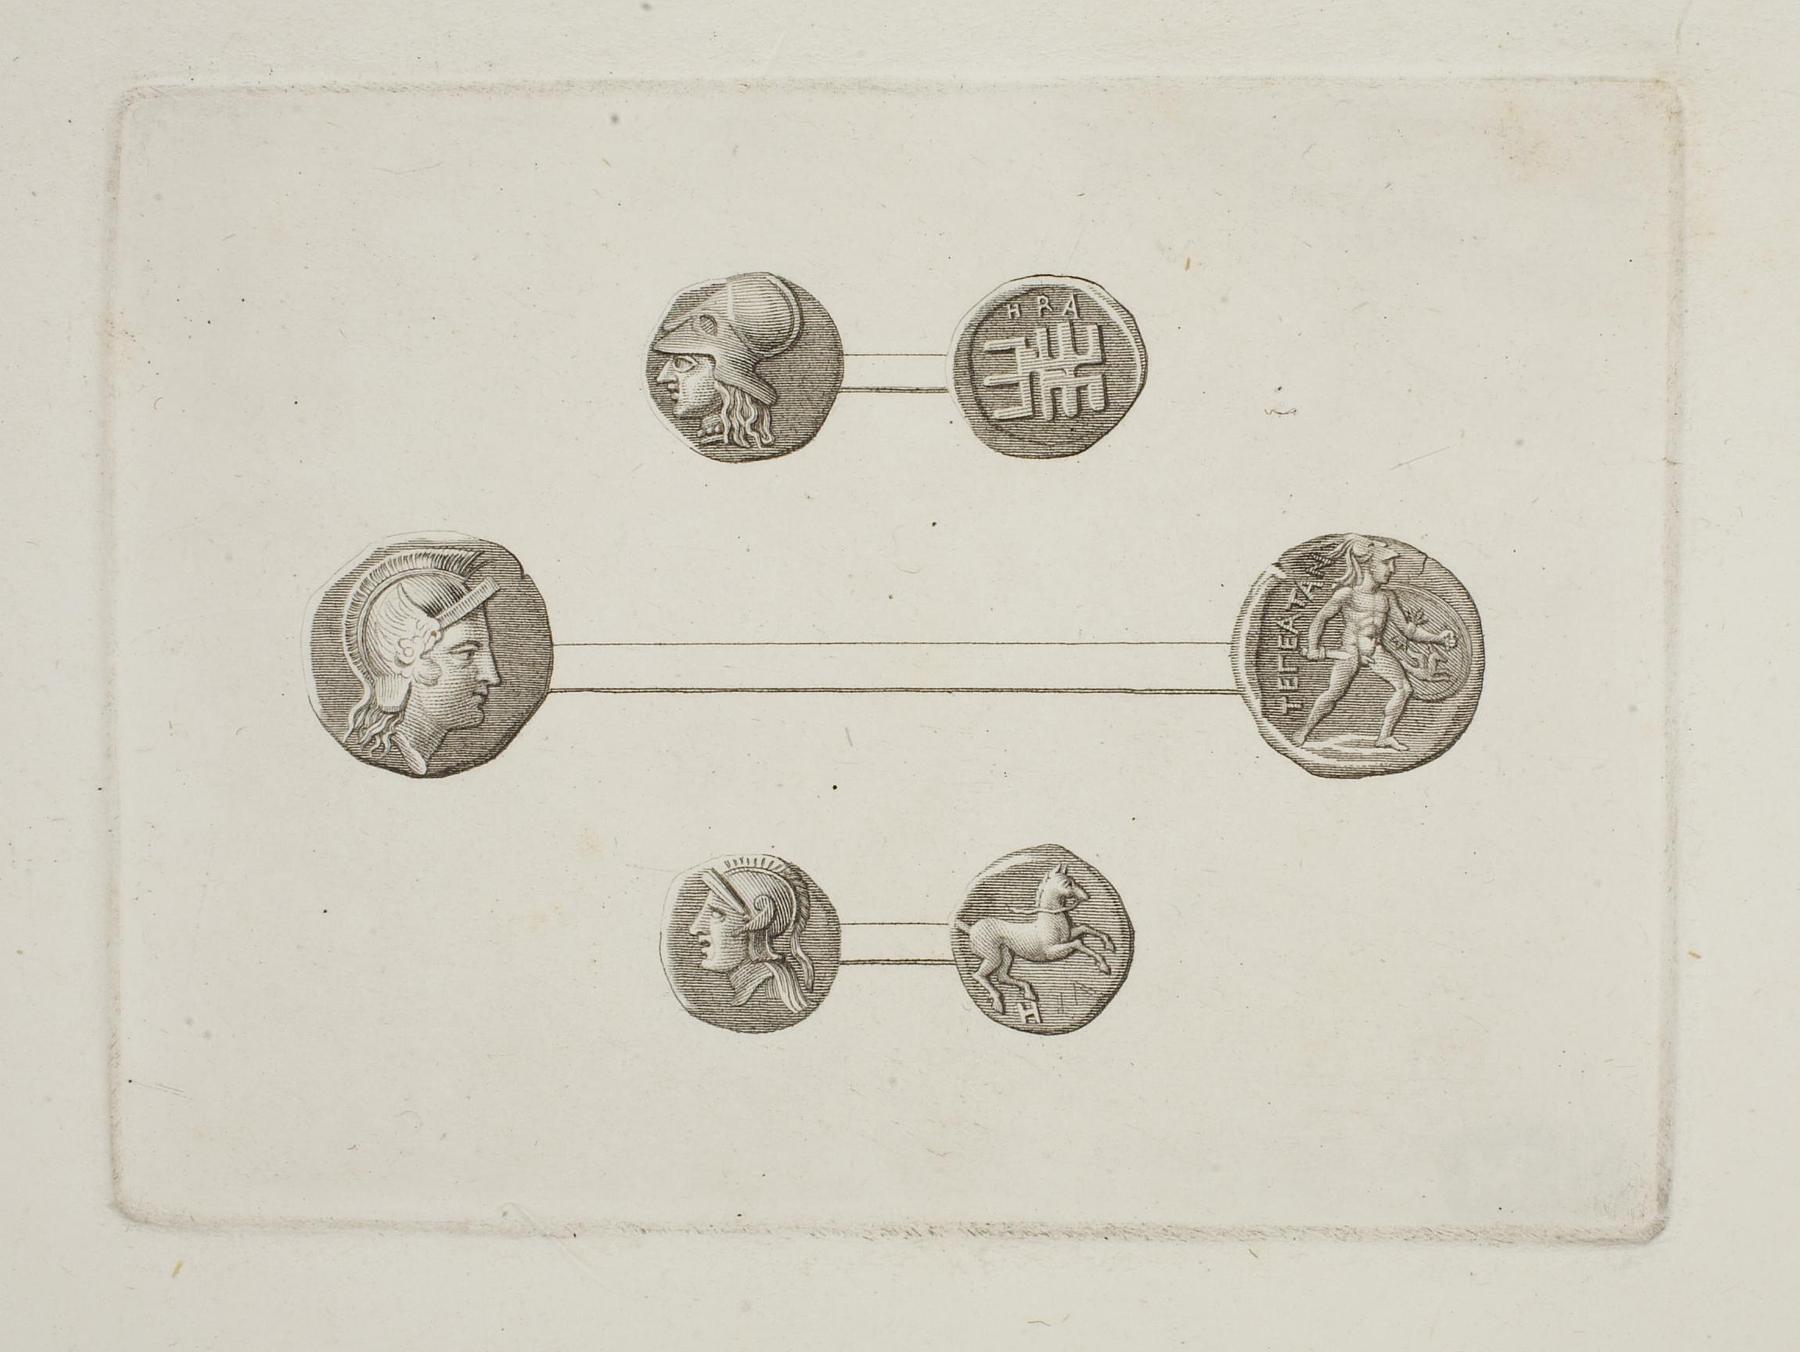 Greek coins obverse and reverse, E1551